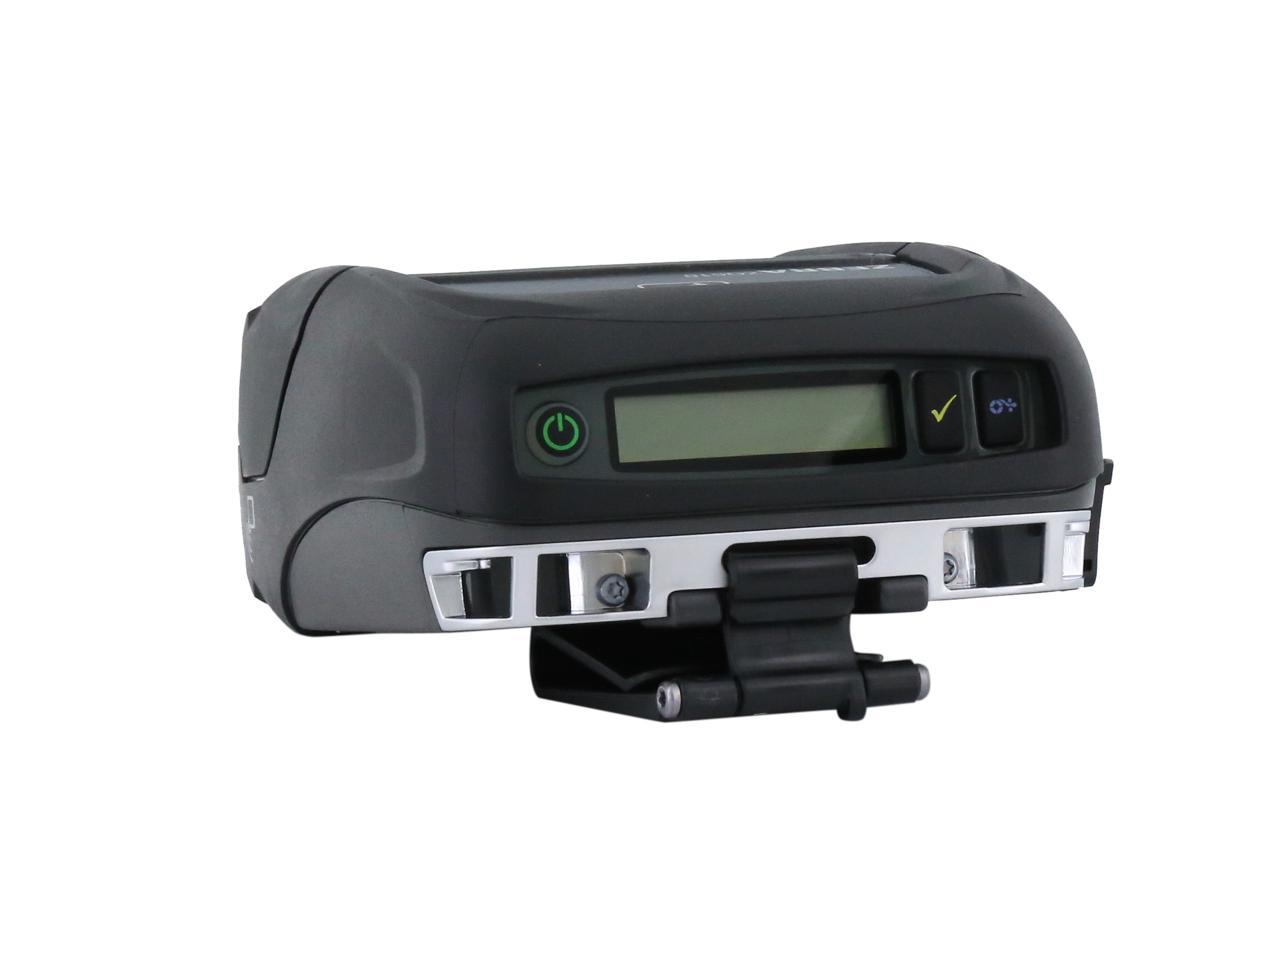 Zebra Zq510 3 Mobile Direct Thermal Receipt And Label Printer 203 Dpi Bluetooth 40 Linered 4904